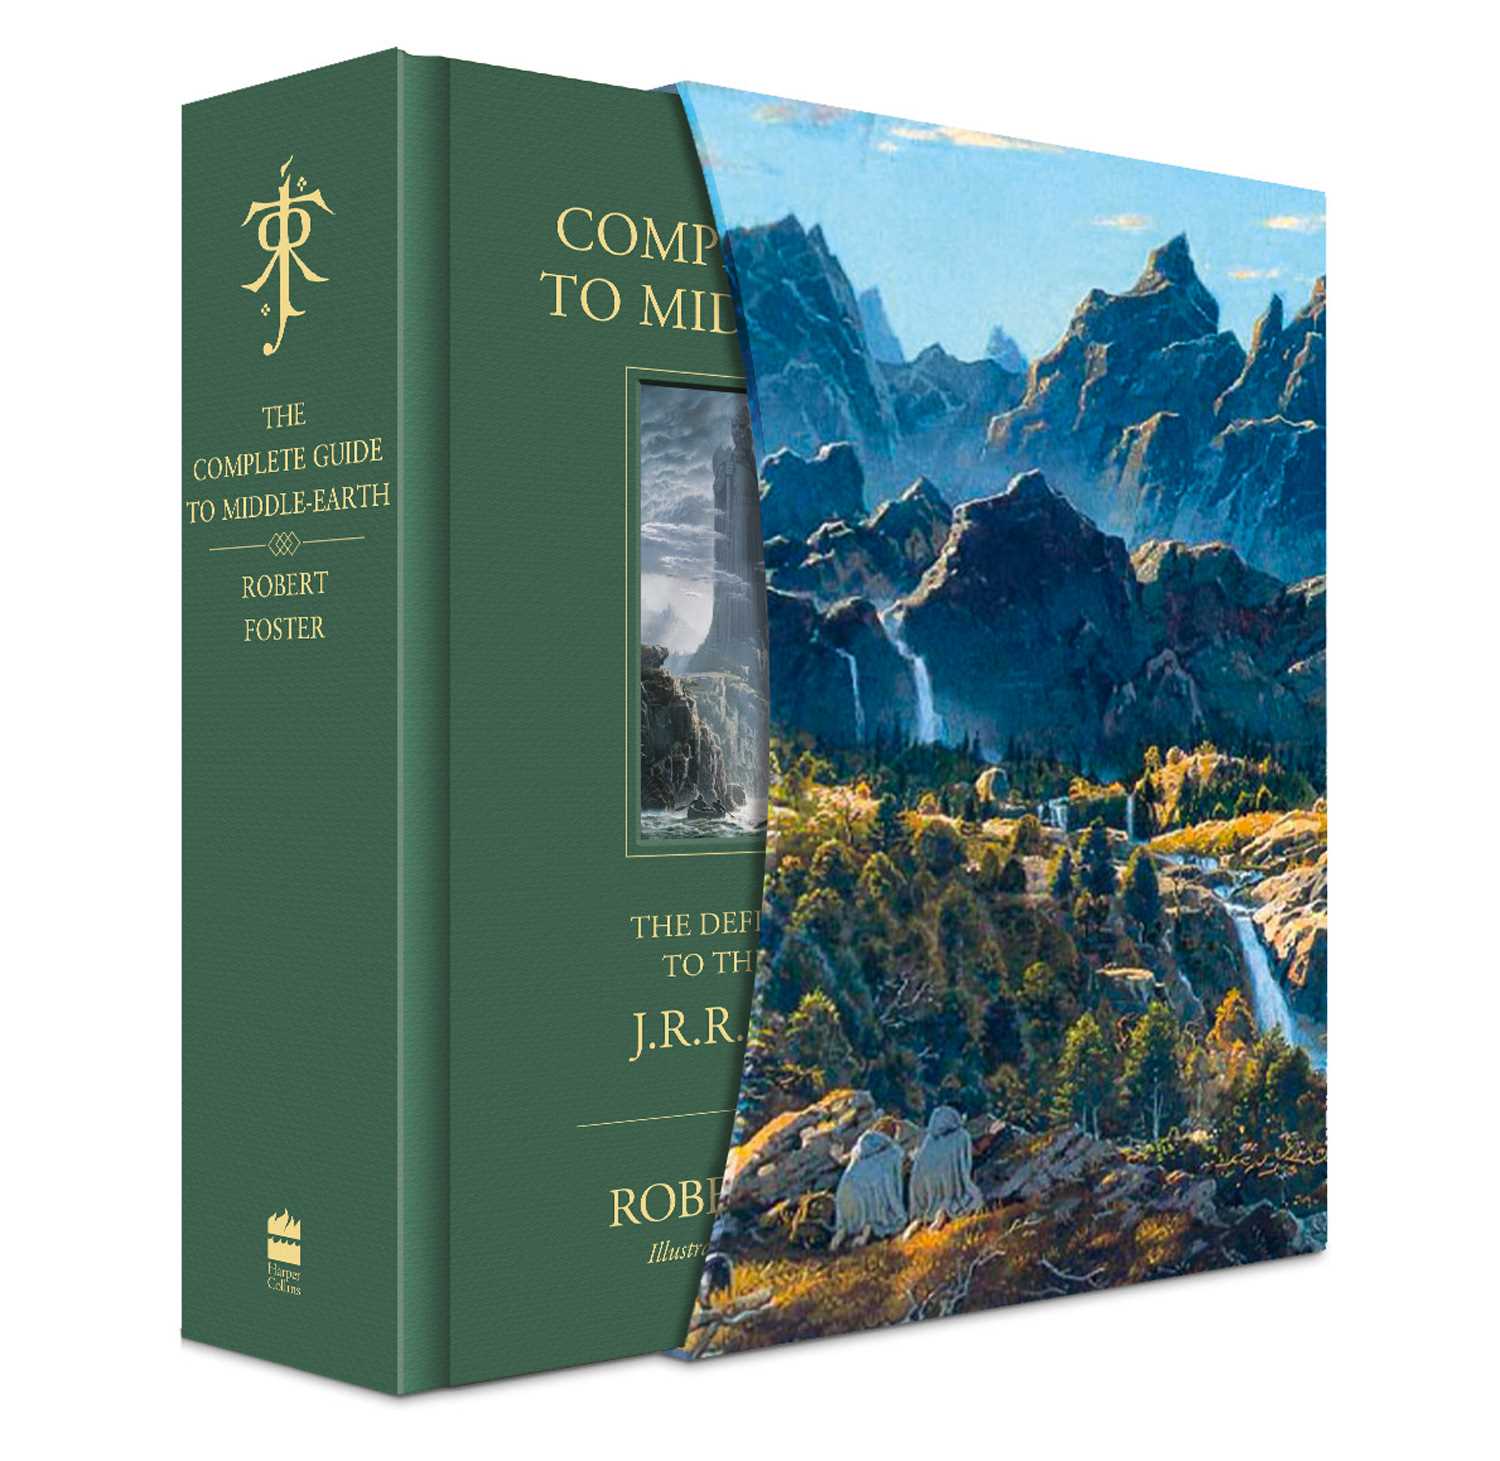 The Complete Guide to Middle-Earth (Illustrated Deluxe Edition)